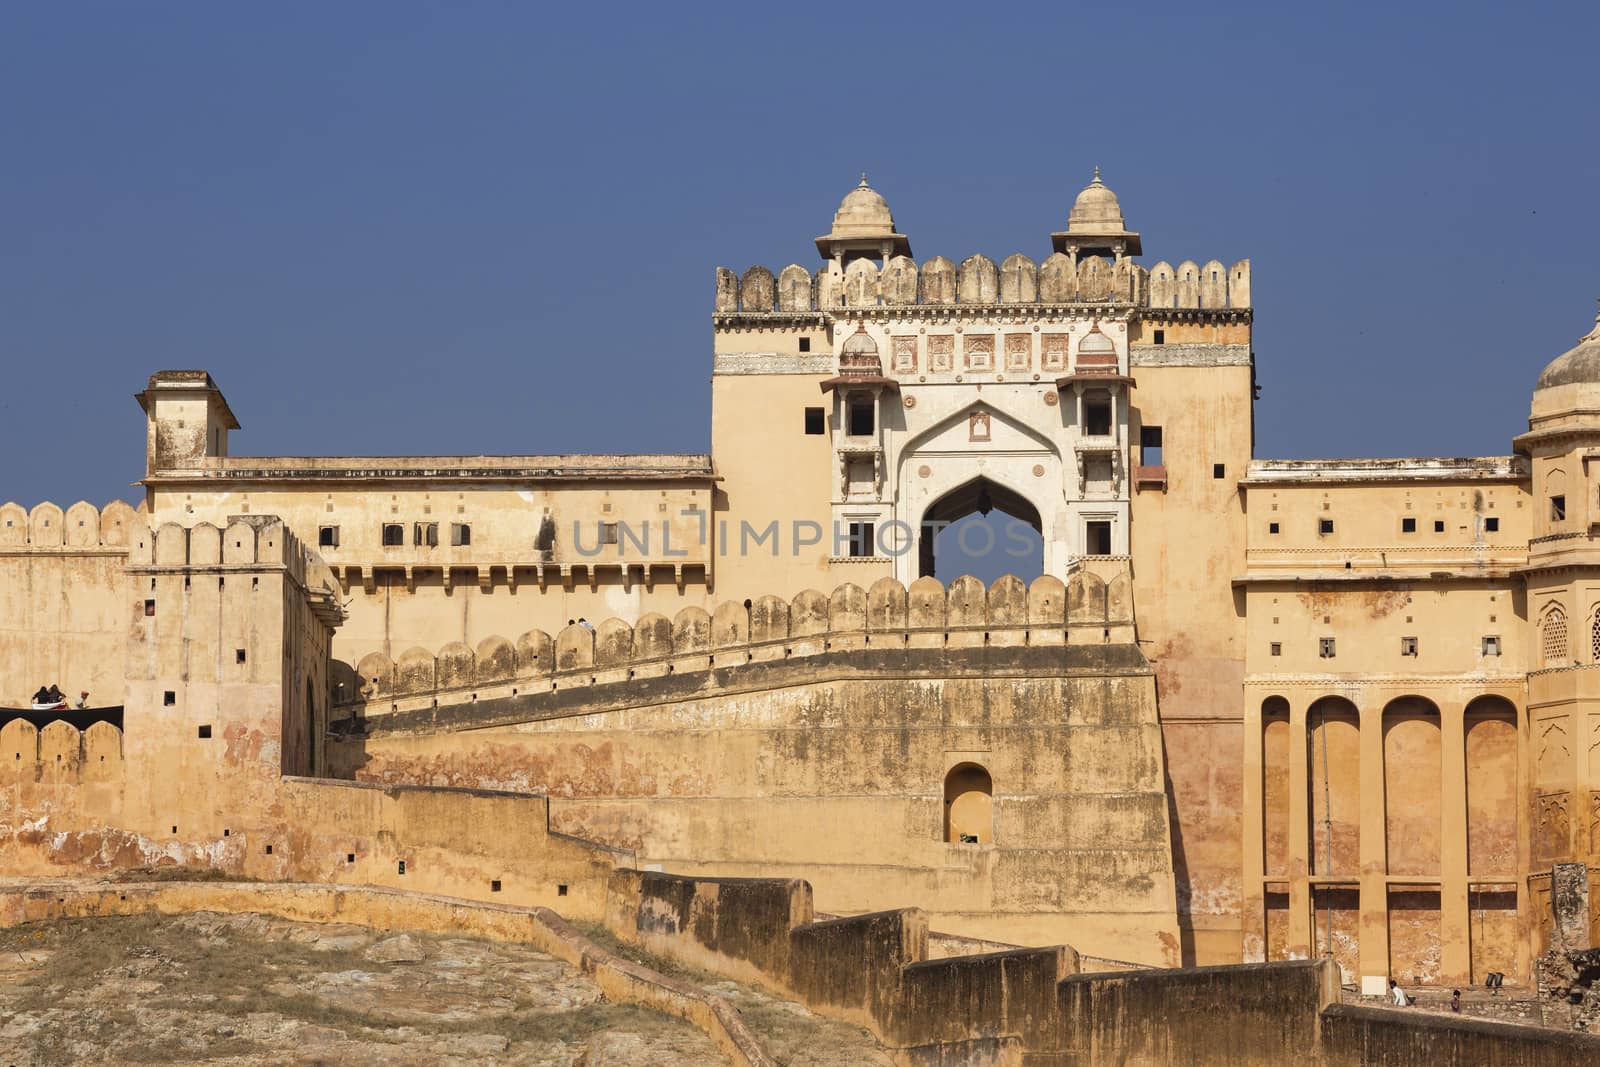 Gate and details of Amber Fort on the outskirts of Jaipur, Rajas by Tjeerdkruse